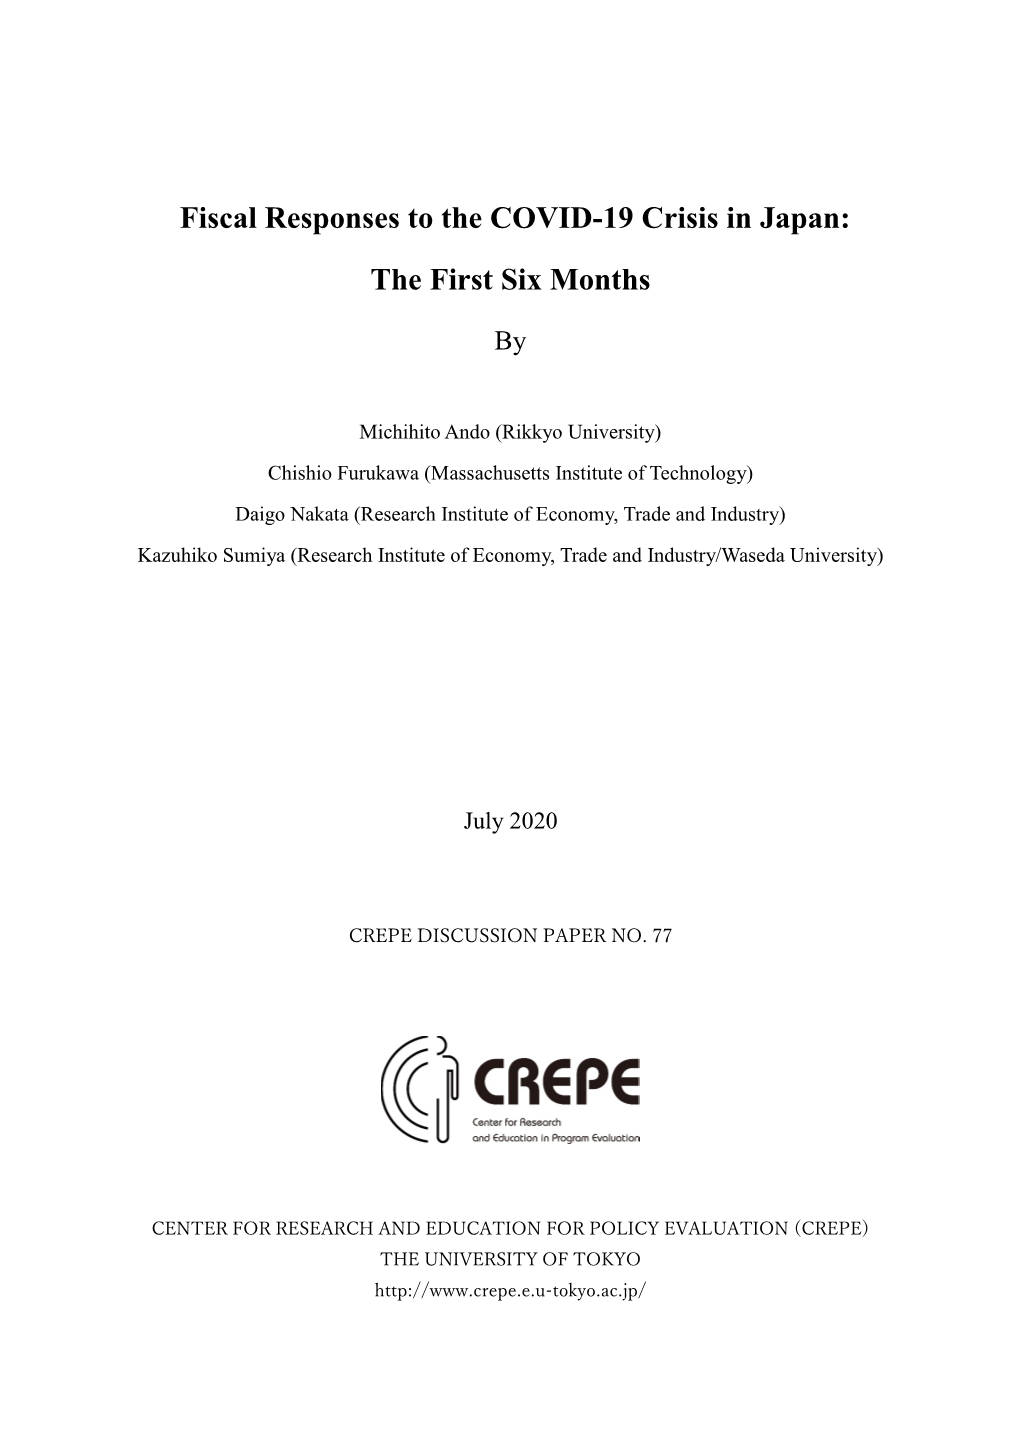 Fiscal Responses to the COVID-19 Crisis in Japan: the First Six Months